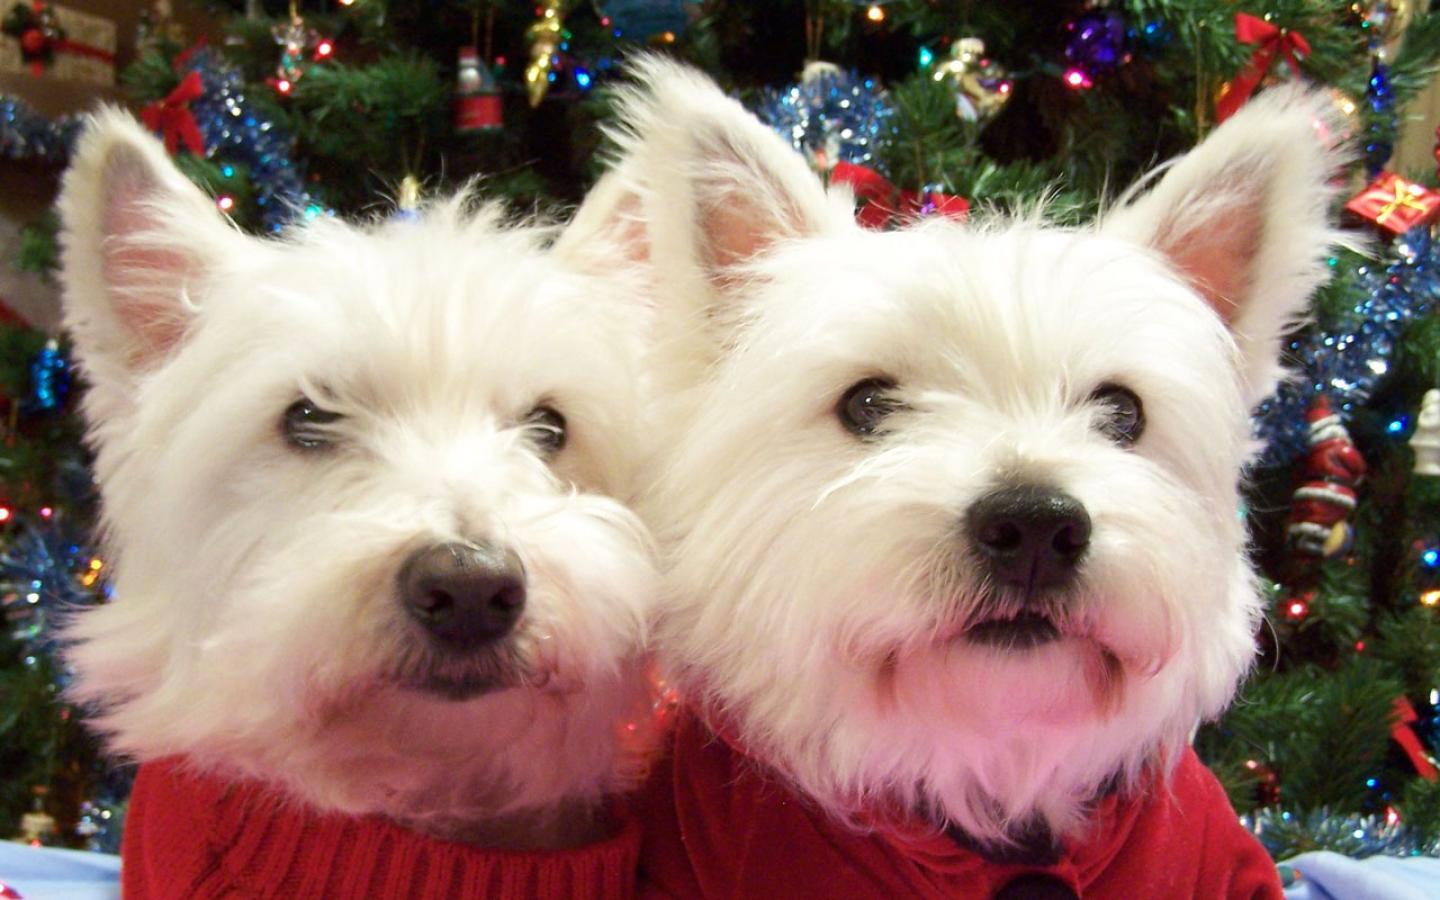 West Highland White Terrier - Looking Great at Christmas Wallpaper #3 1440 x 900 